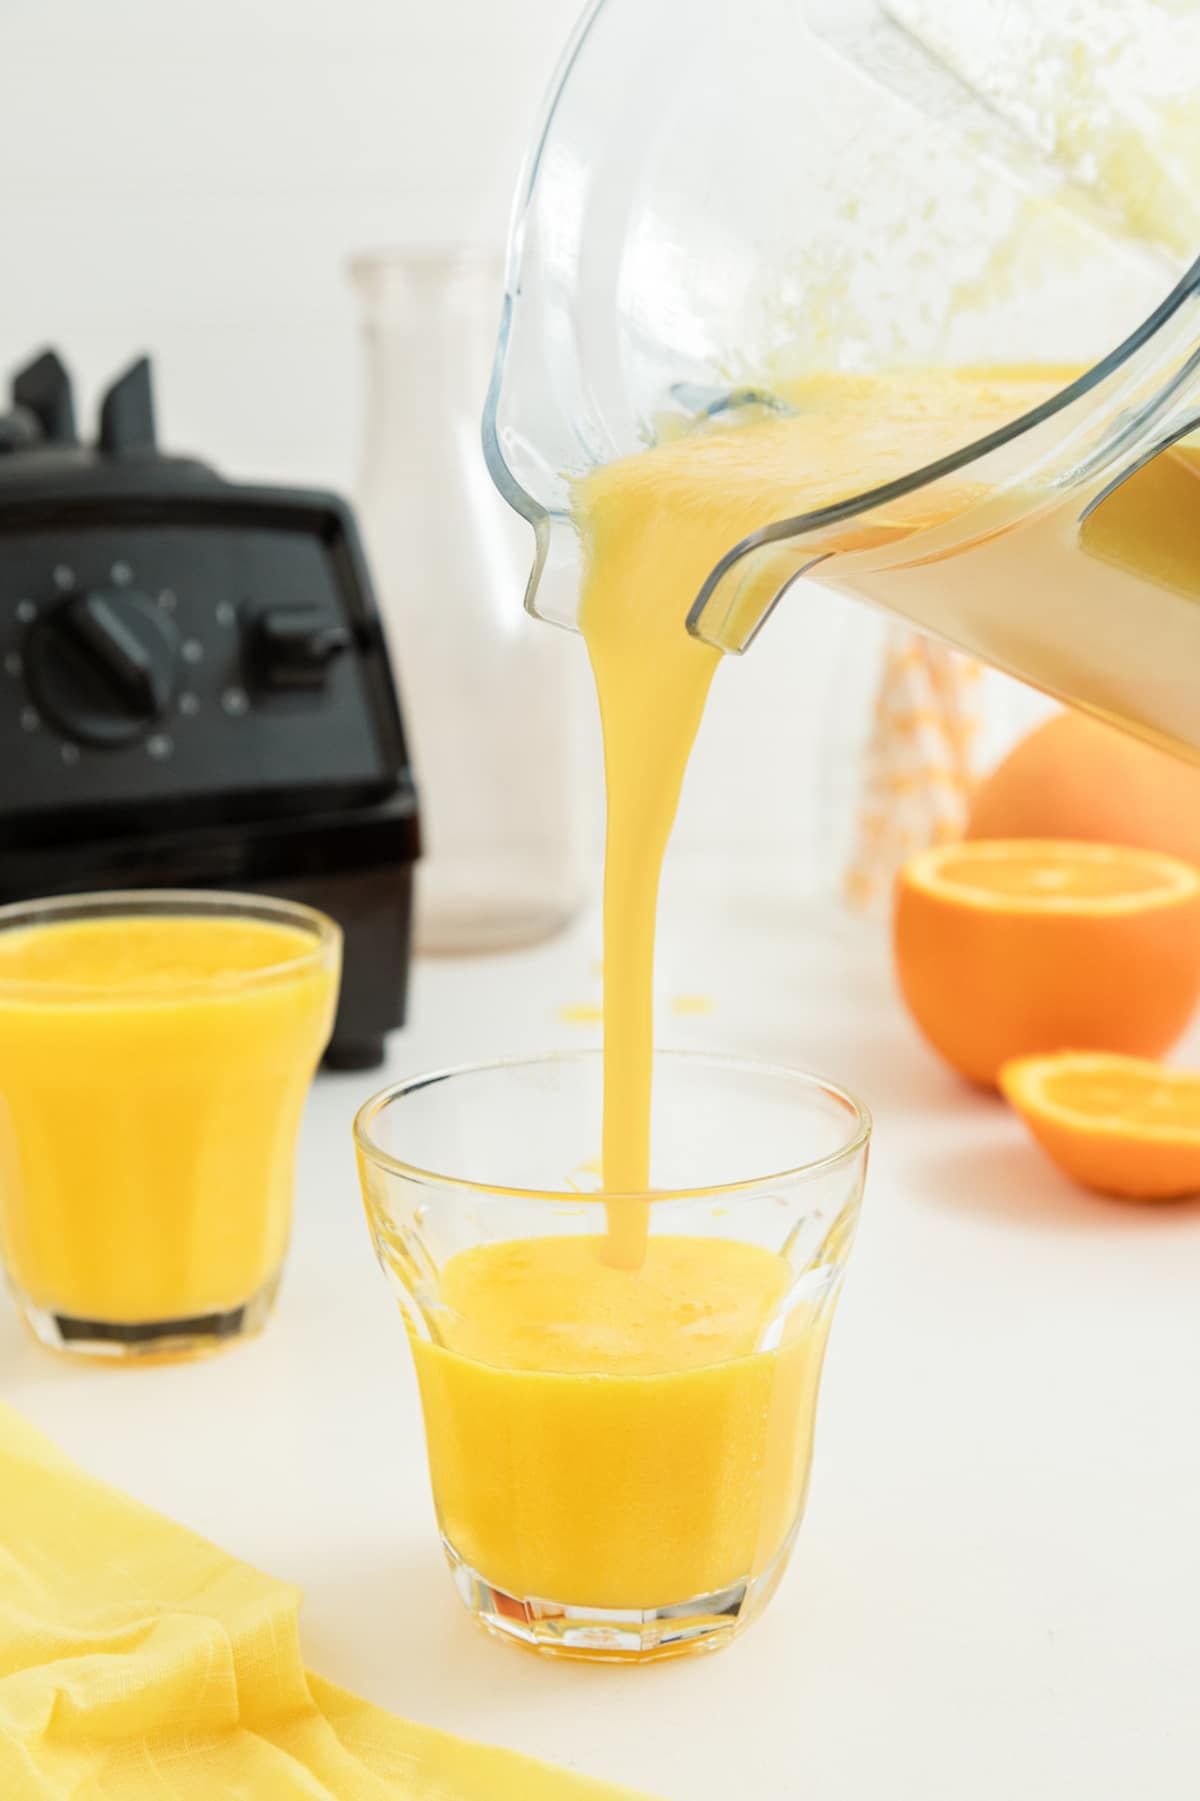 pouring orange juice from vitamix into glass.